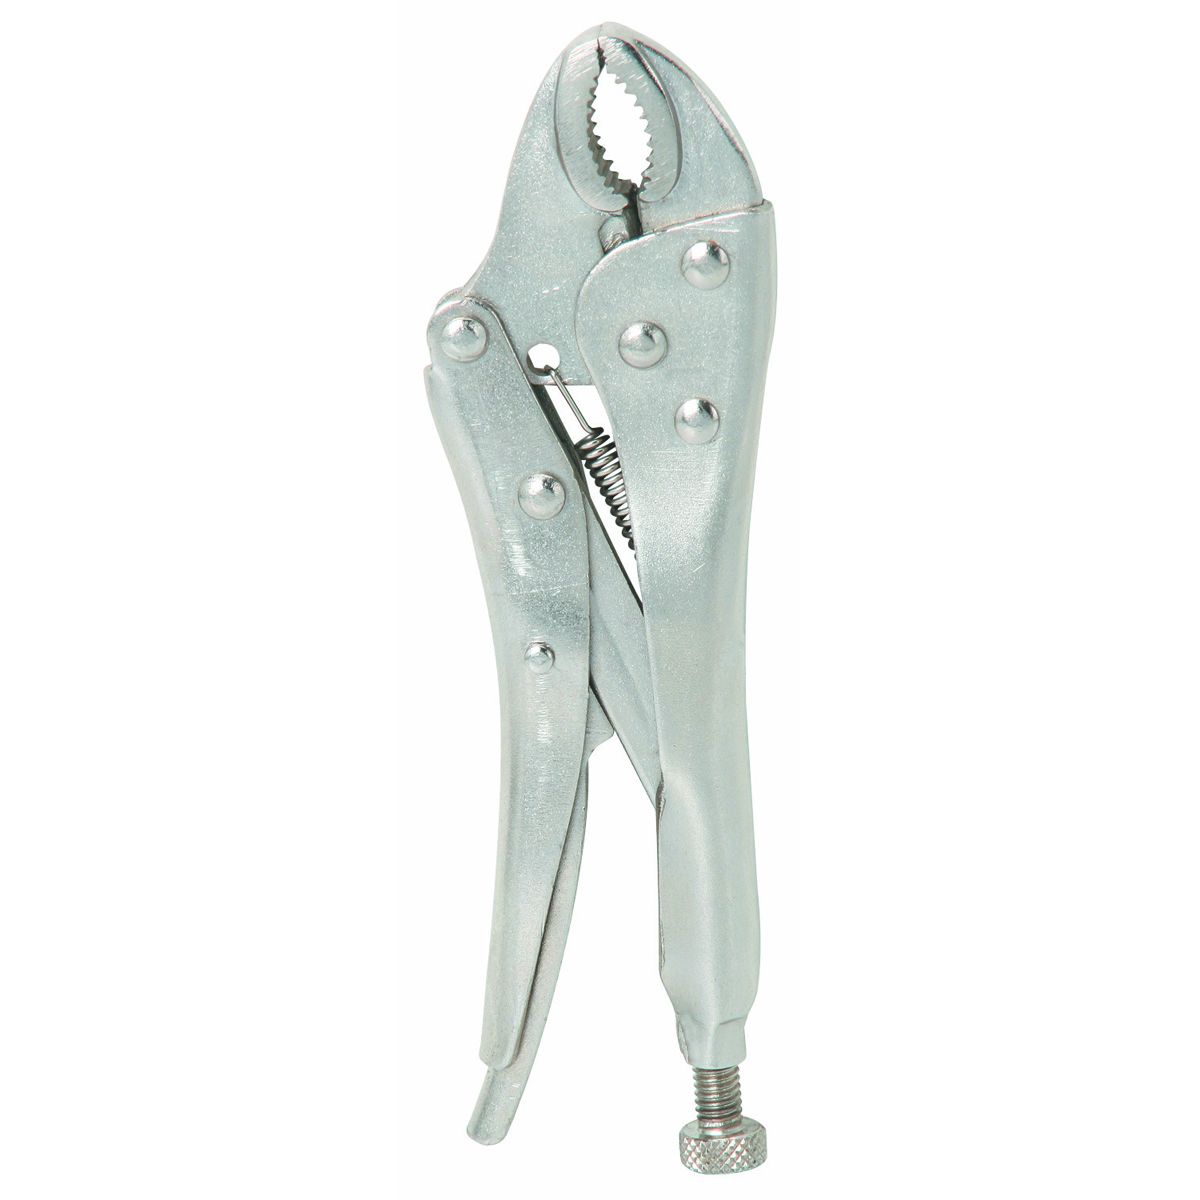 PITTSBURGH 5" Curved Jaw Locking Pliers